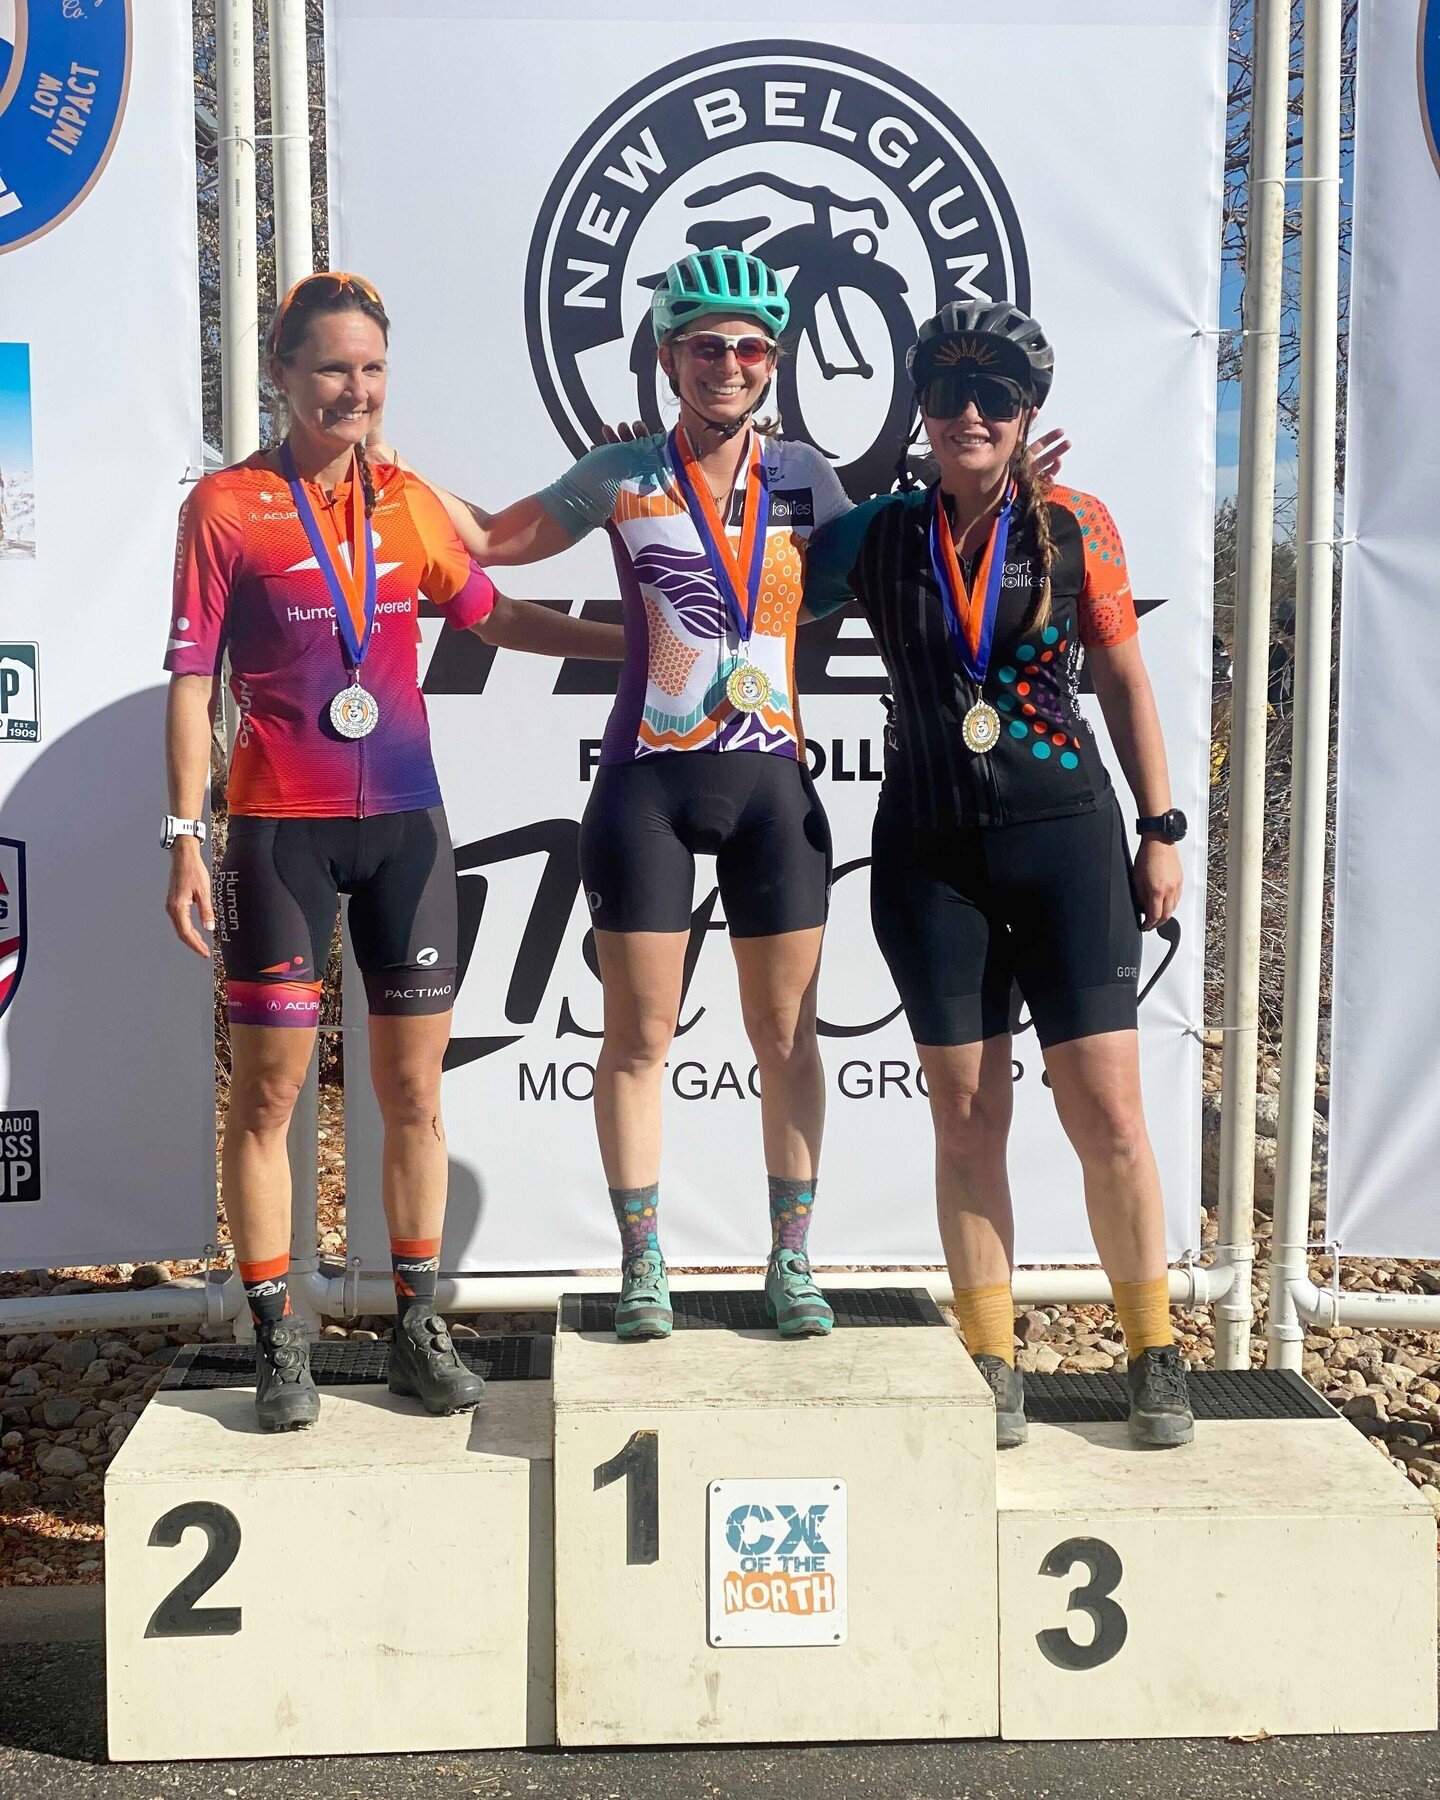 🌟 Great job to everyone who raced in @crossofthenorth this weekend!

🏆 Congratulations to @kyjo627 and @reddee2adventure for getting on the Beginner's podium!!